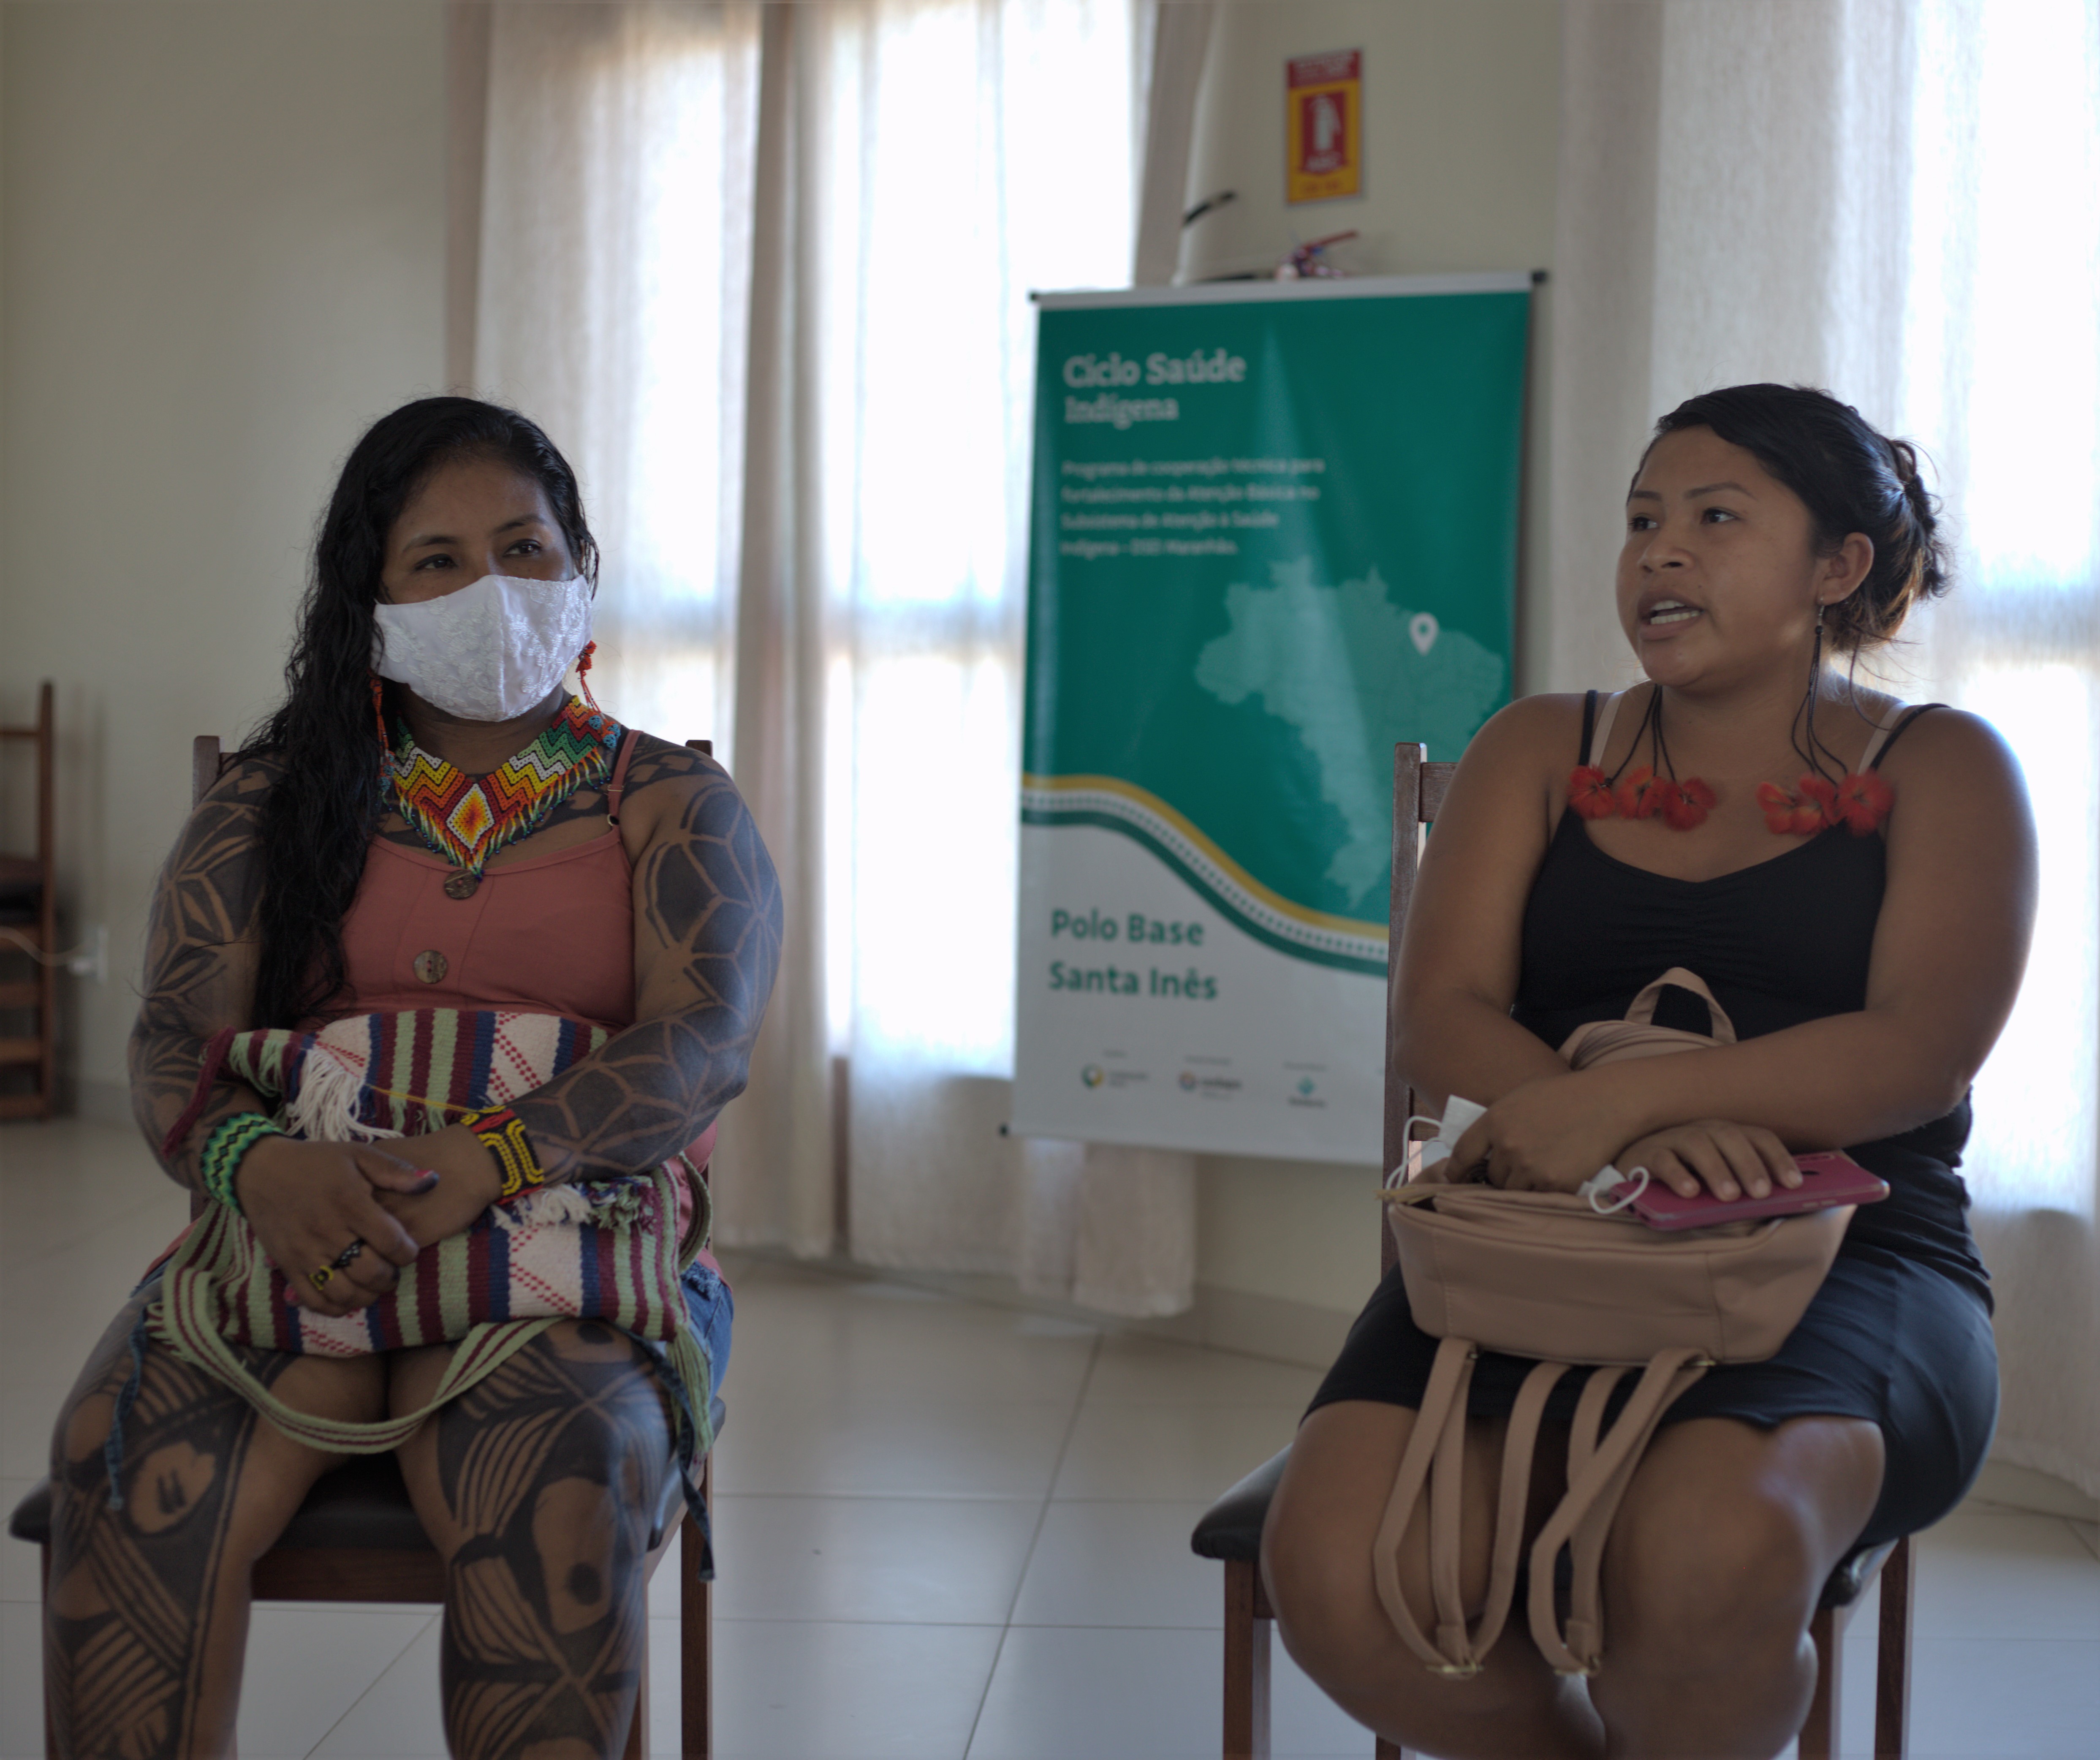 Image of two Indigenous women sitting in a room. Behind them you can see a chart about the Indigenous Health Cycle